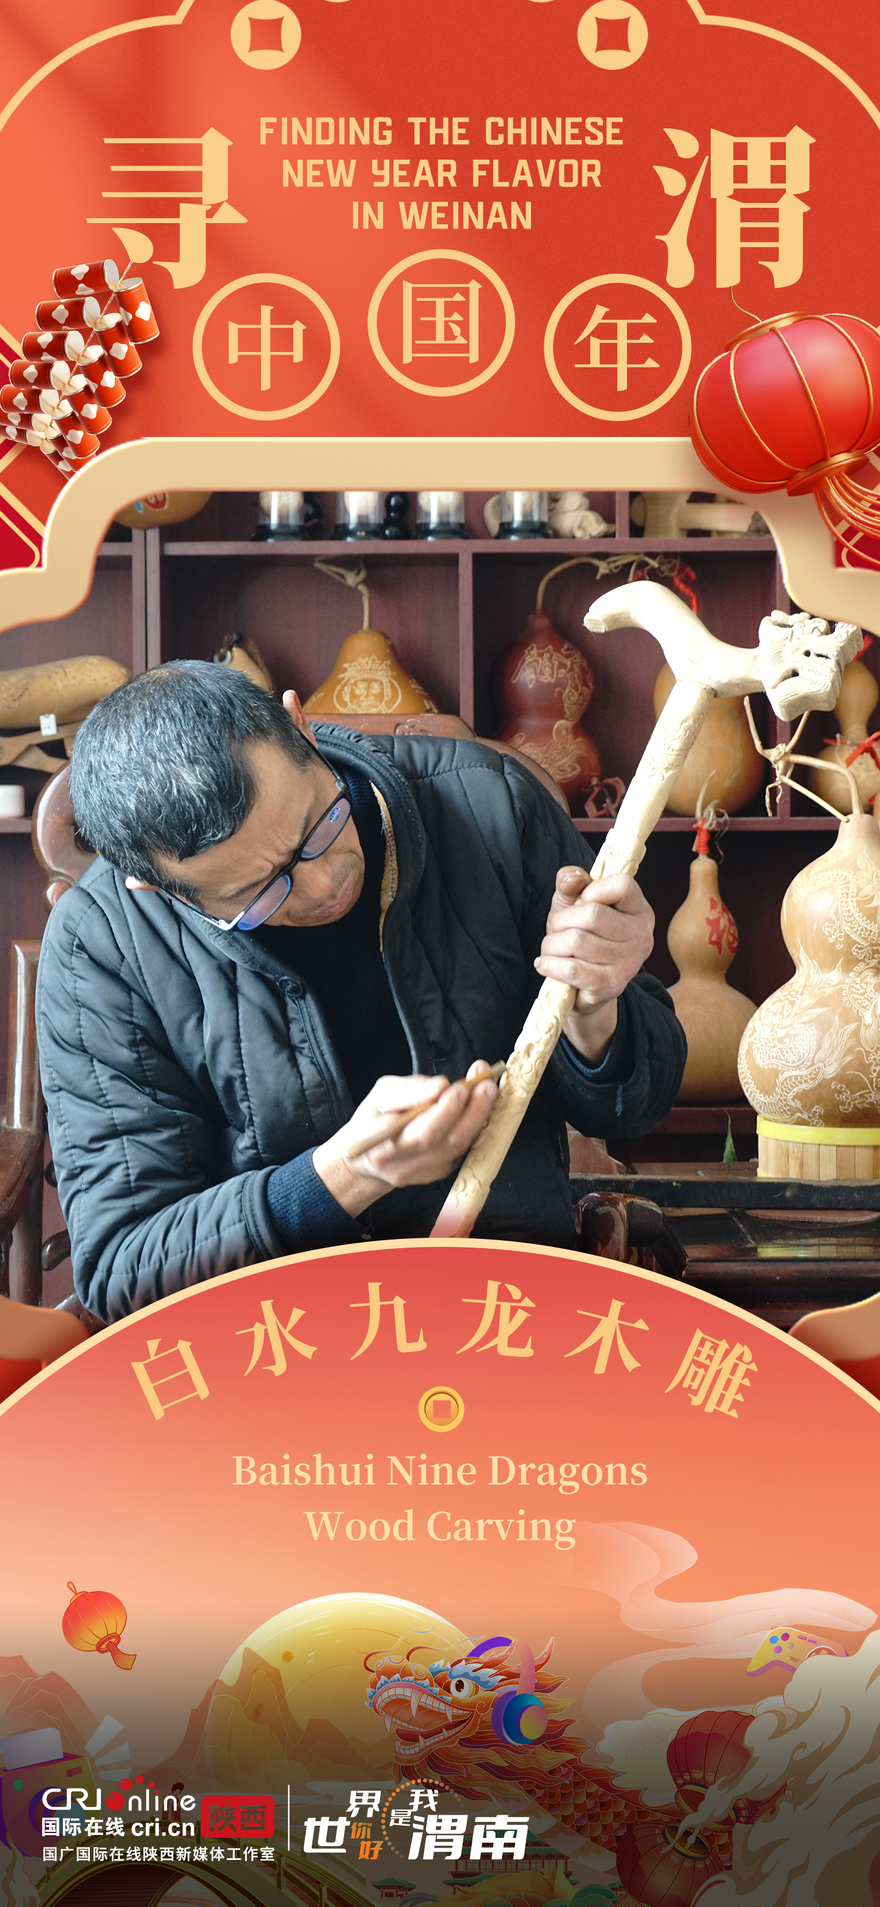 Finding the Chinese New Year Flavor in Weinan_fororder_微信图片_20240209111217